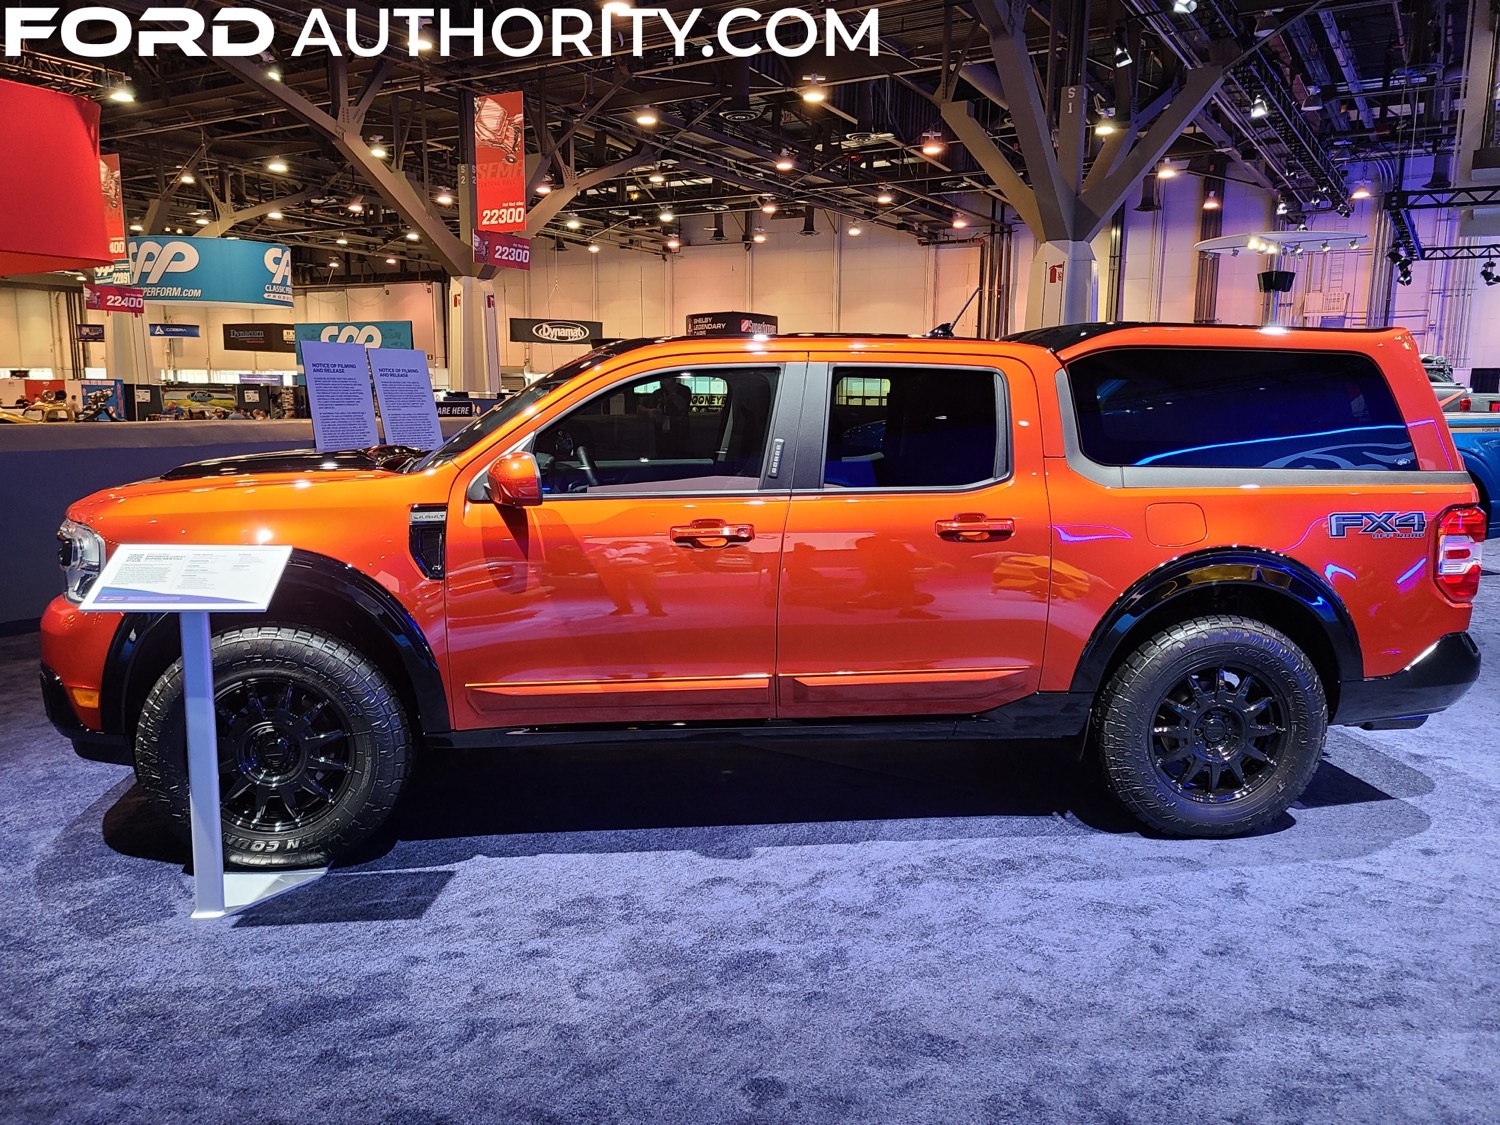 2022 Ford Maverick Lariat Fx4 Build By Air Design Live Gallery